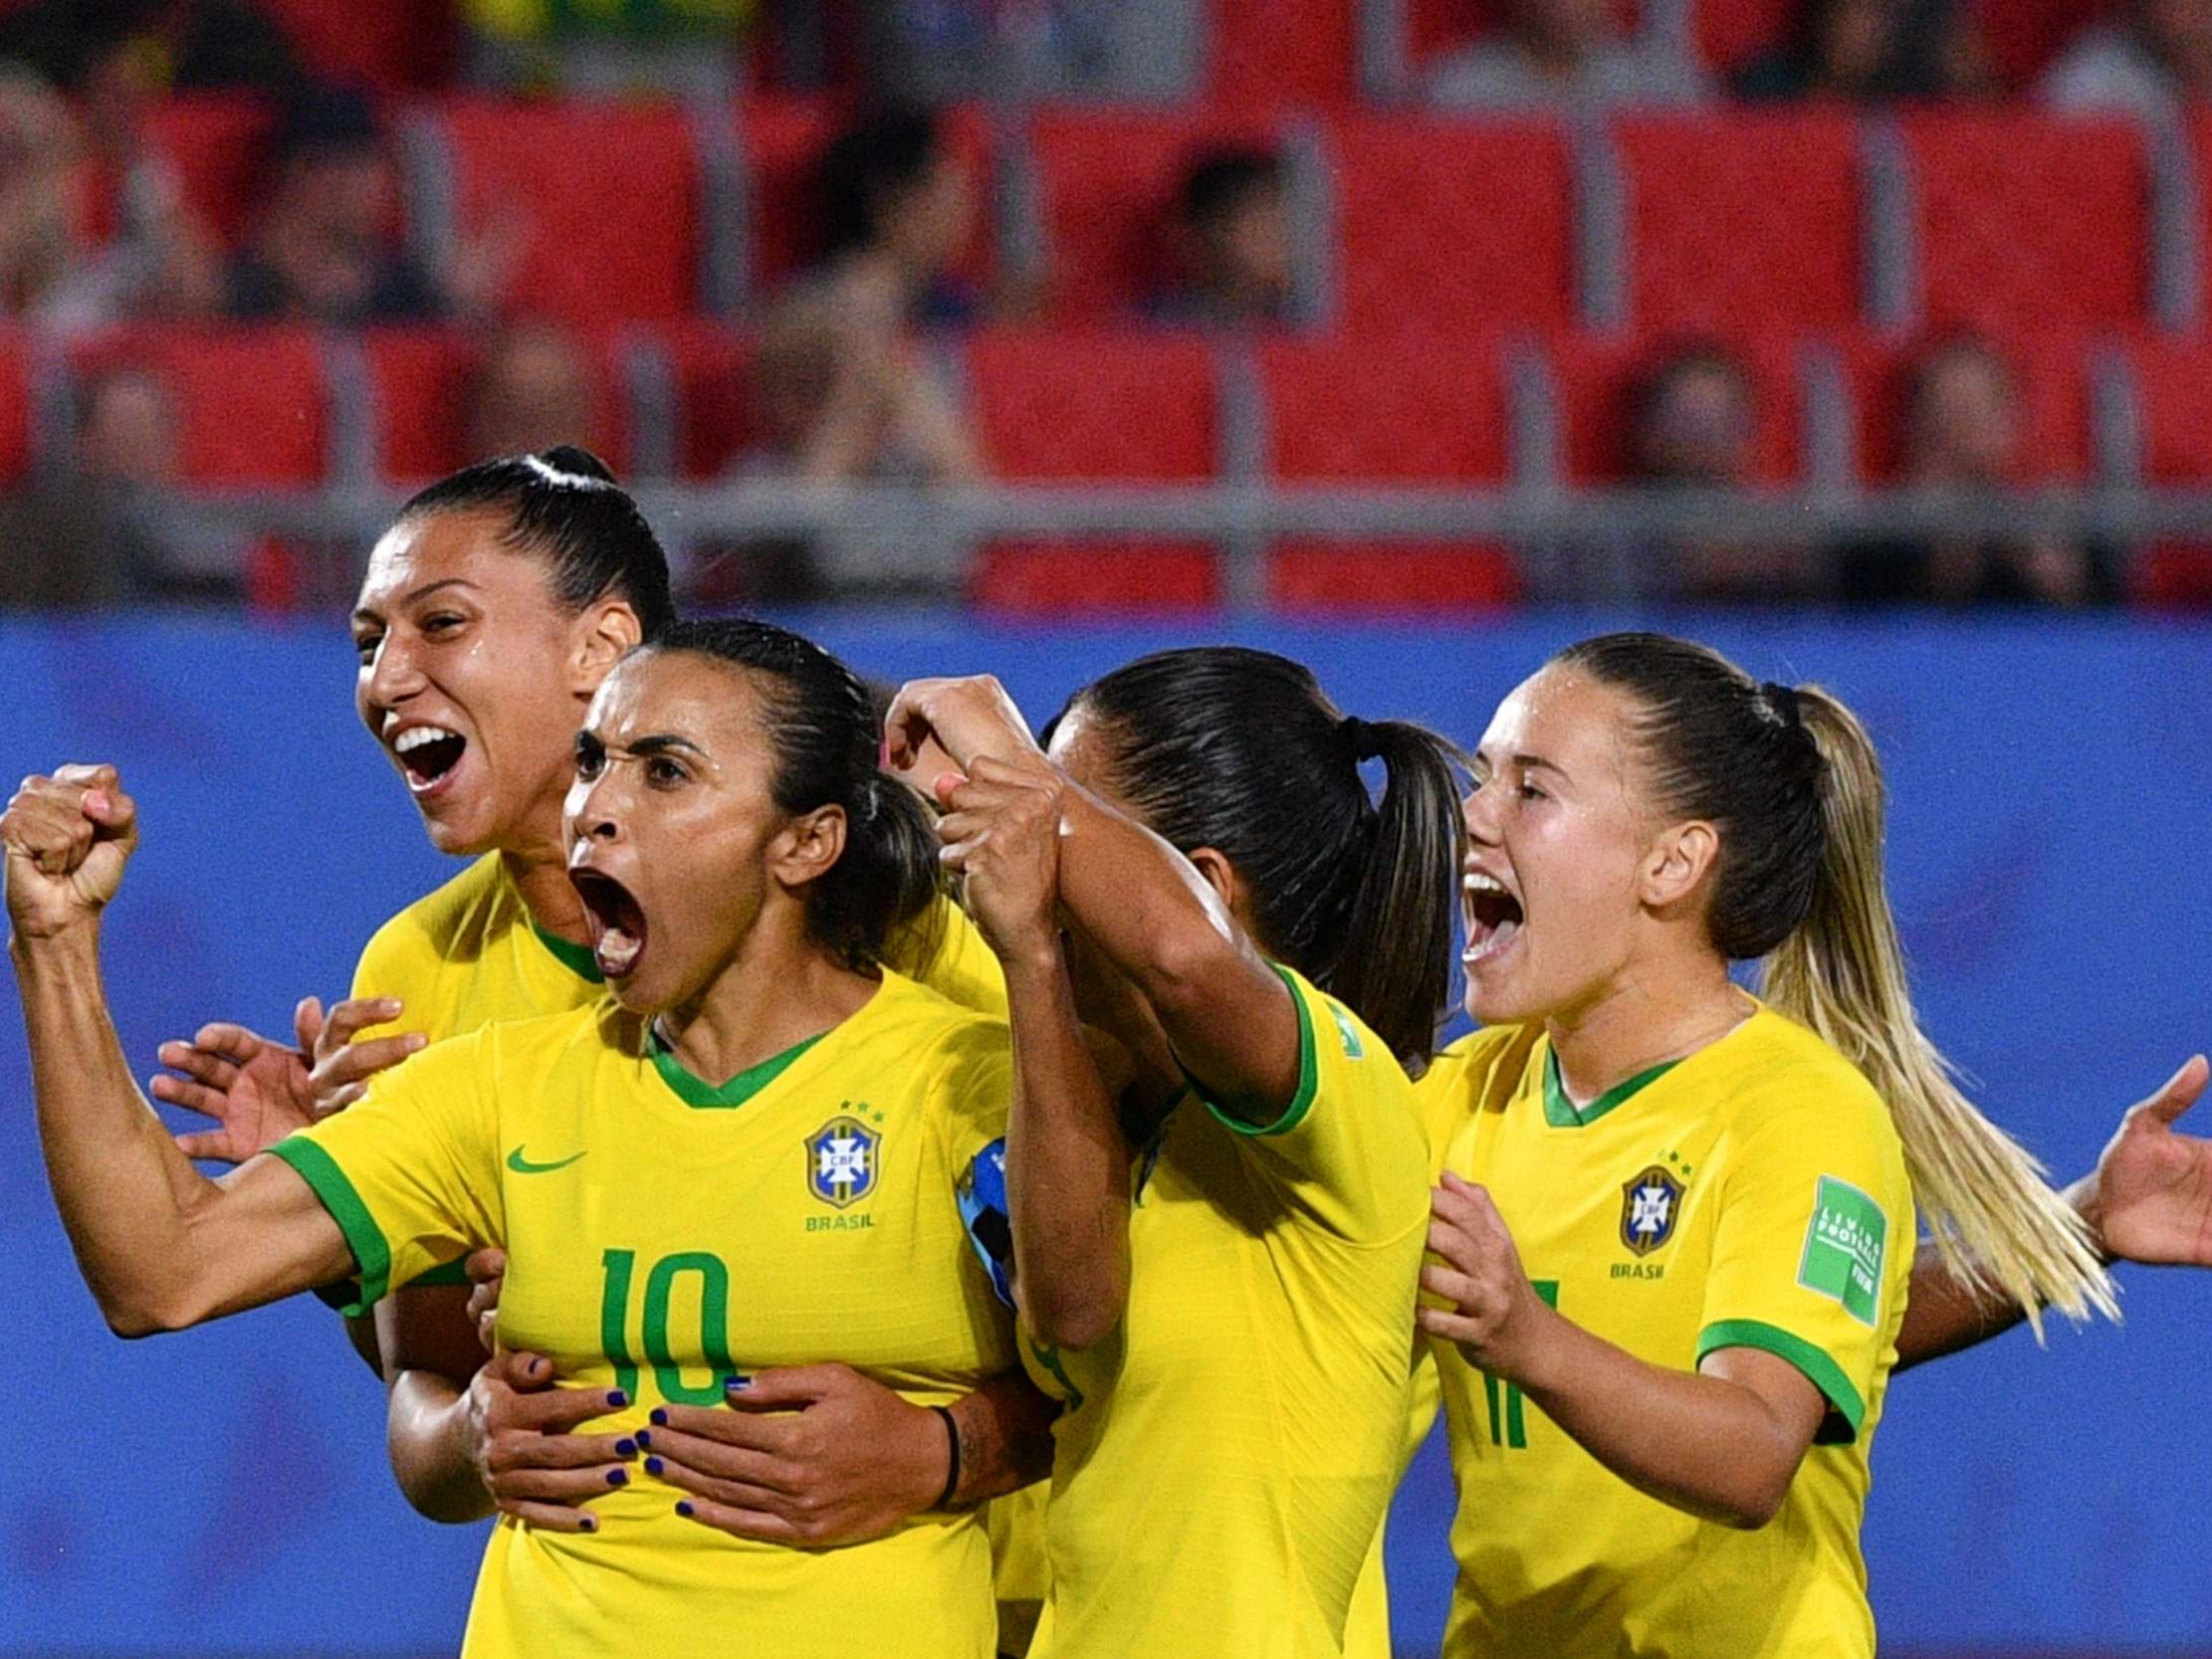 Brazil secured their place in the last 16 by sealing third place in Group C